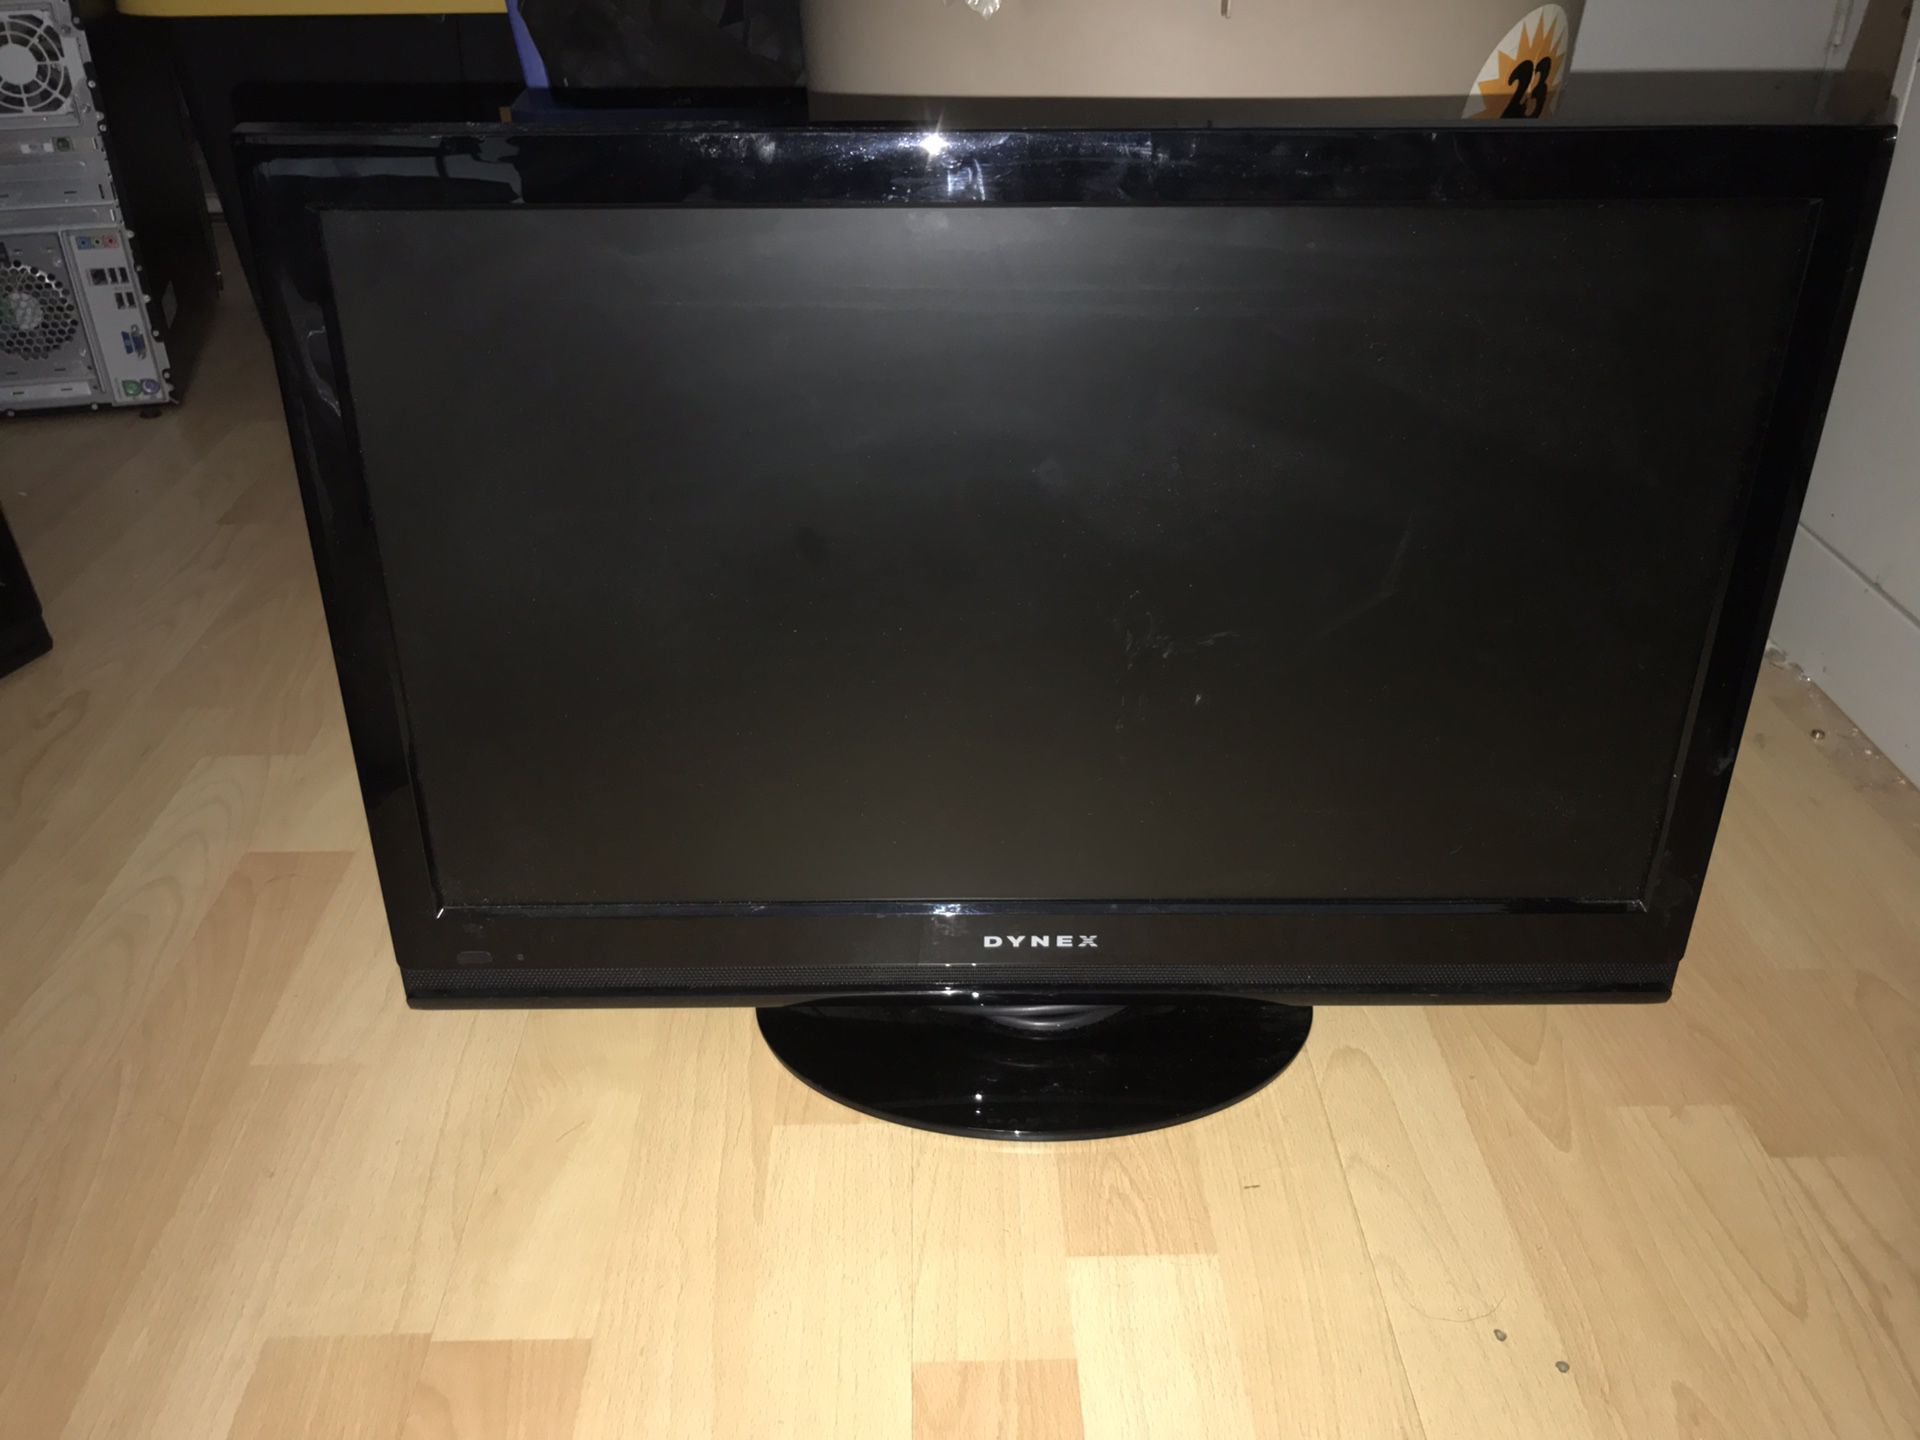 Dynex 24 inch LED TV $ 30 with original remote. Excellent Condition